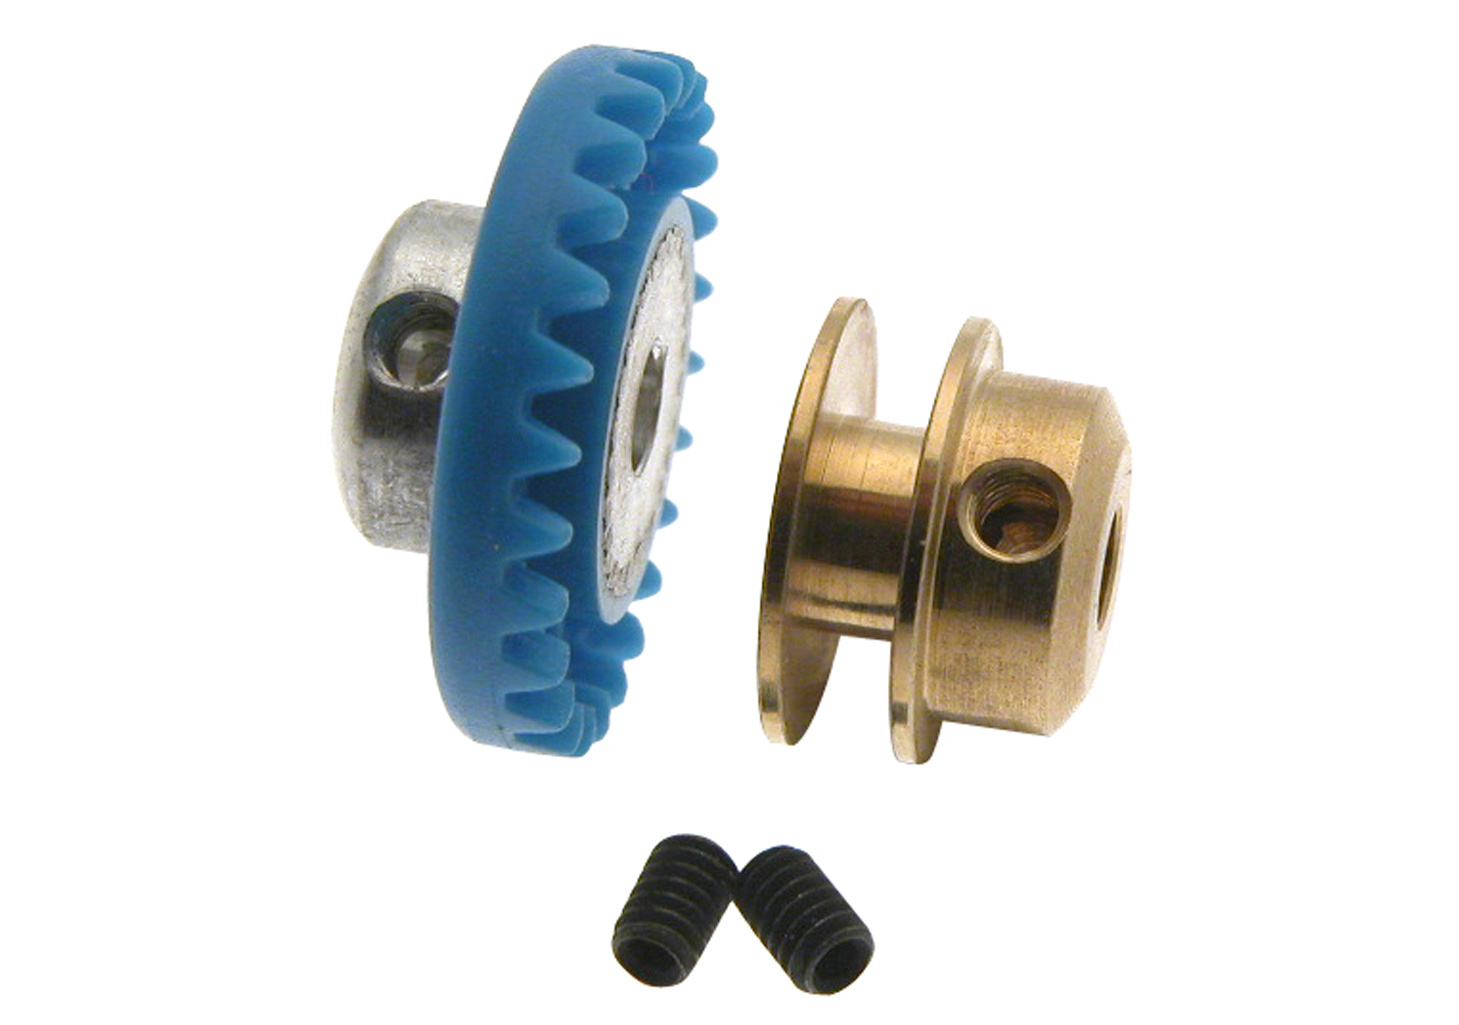 SC-1112 Nylon crown Gear 26t.  M50 with M2 screw for 3/32" axle